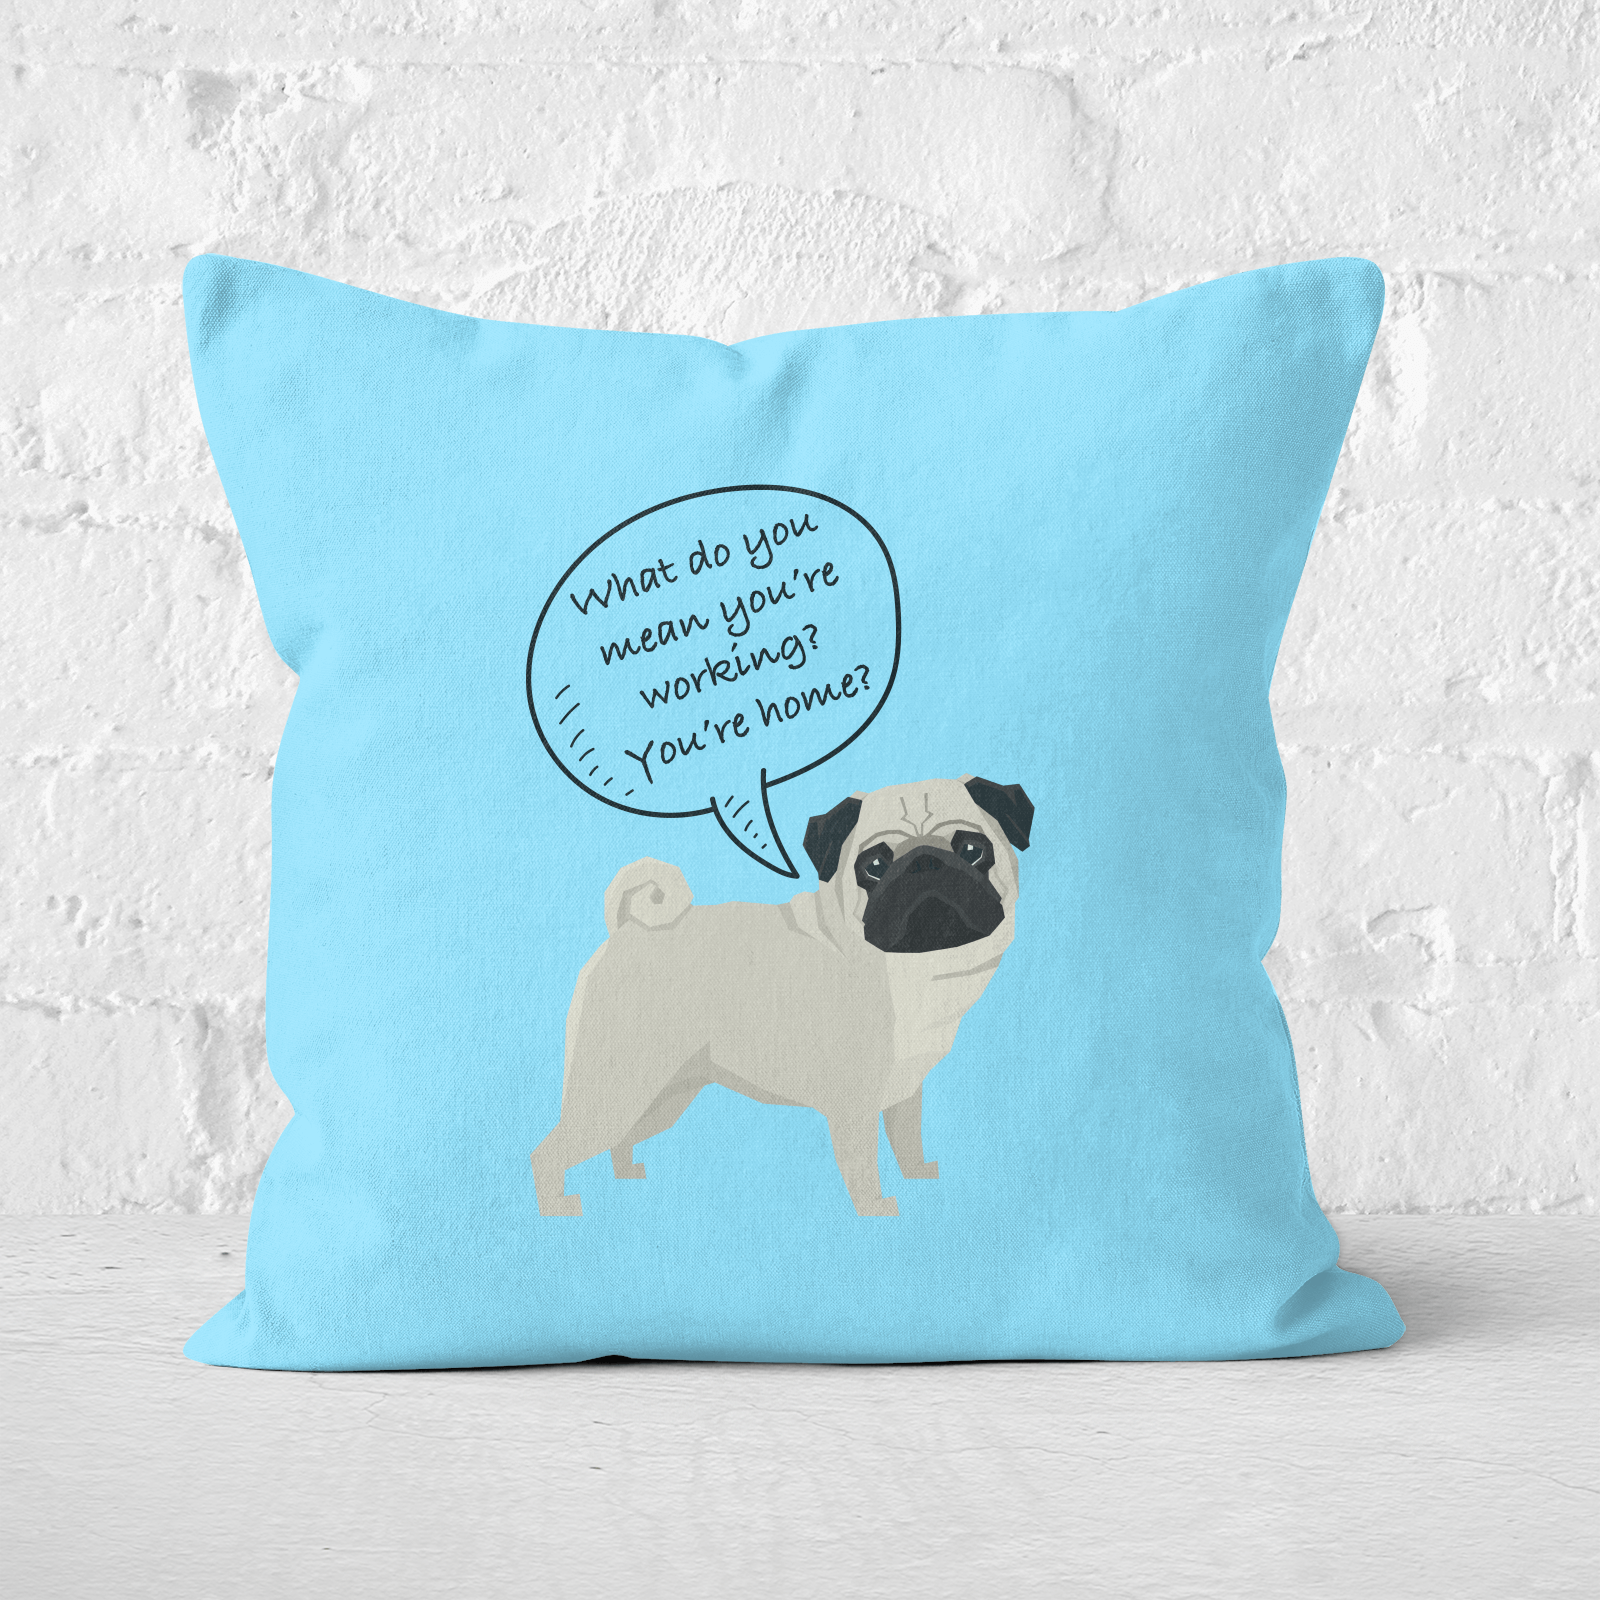 Pug - What Do You Mean You're Working? Square Cushion - 60x60cm - Soft Touch